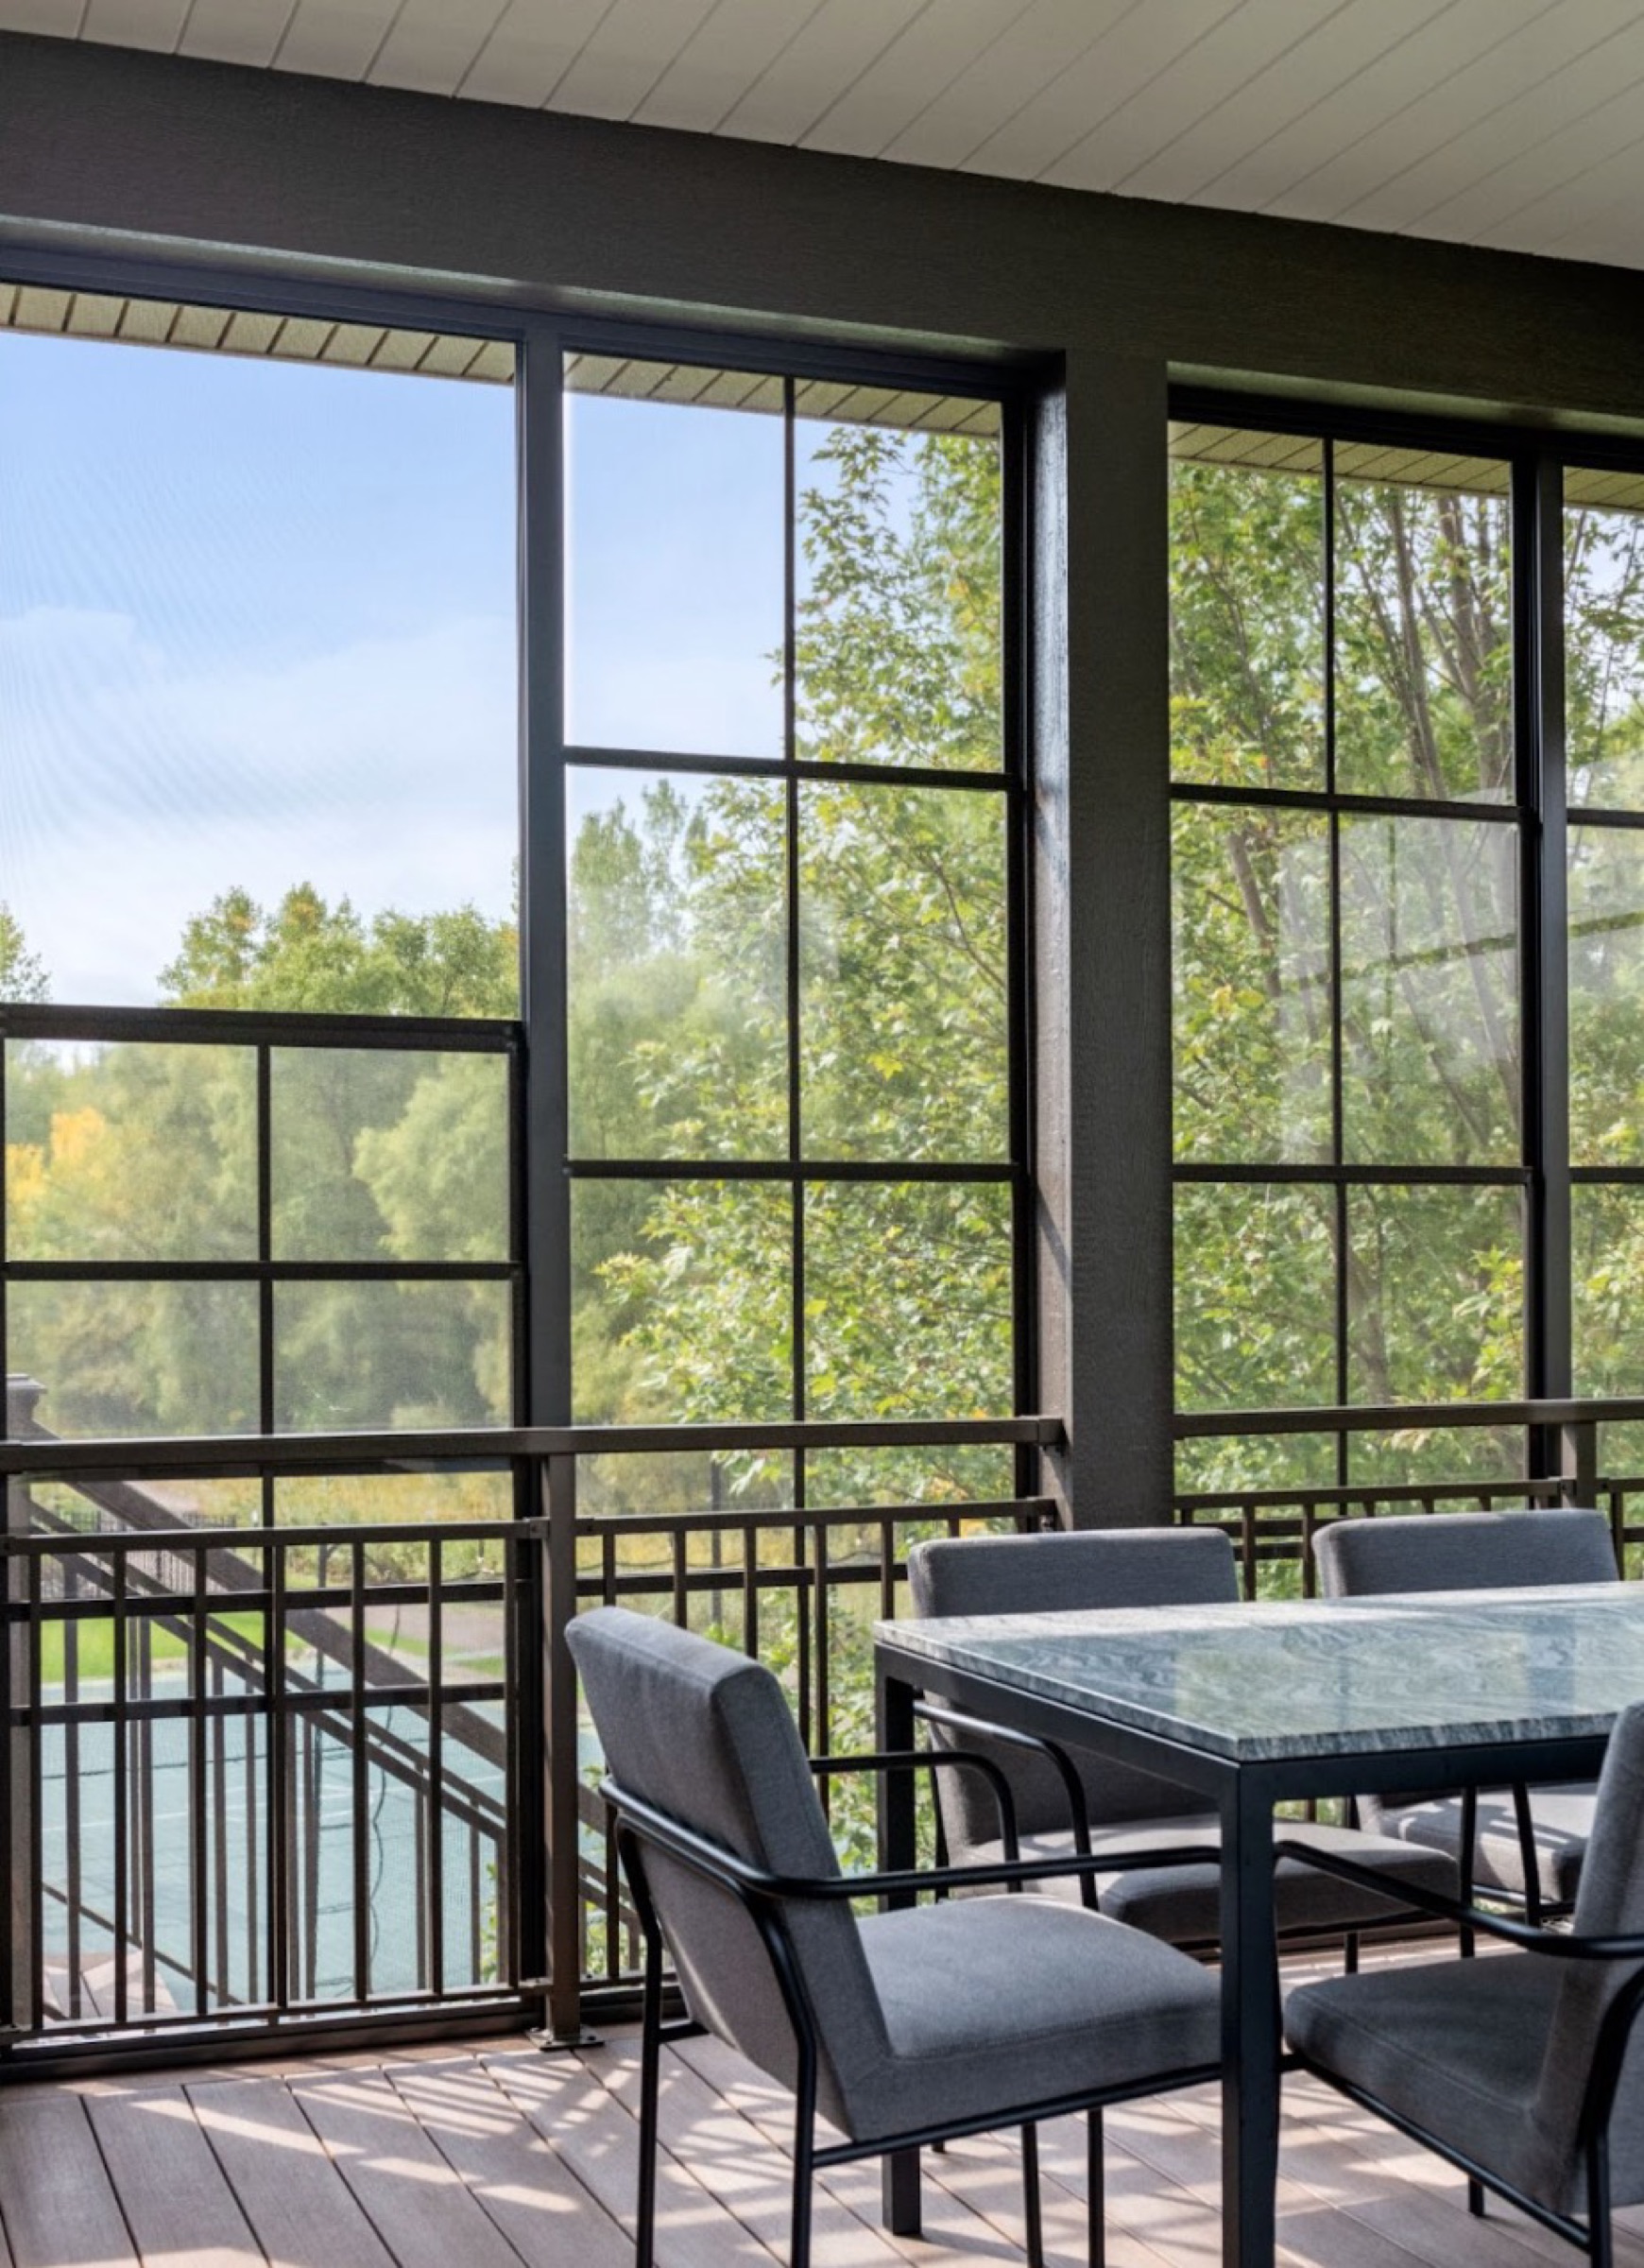 View from inside a new screened in porch in Eagan, MN